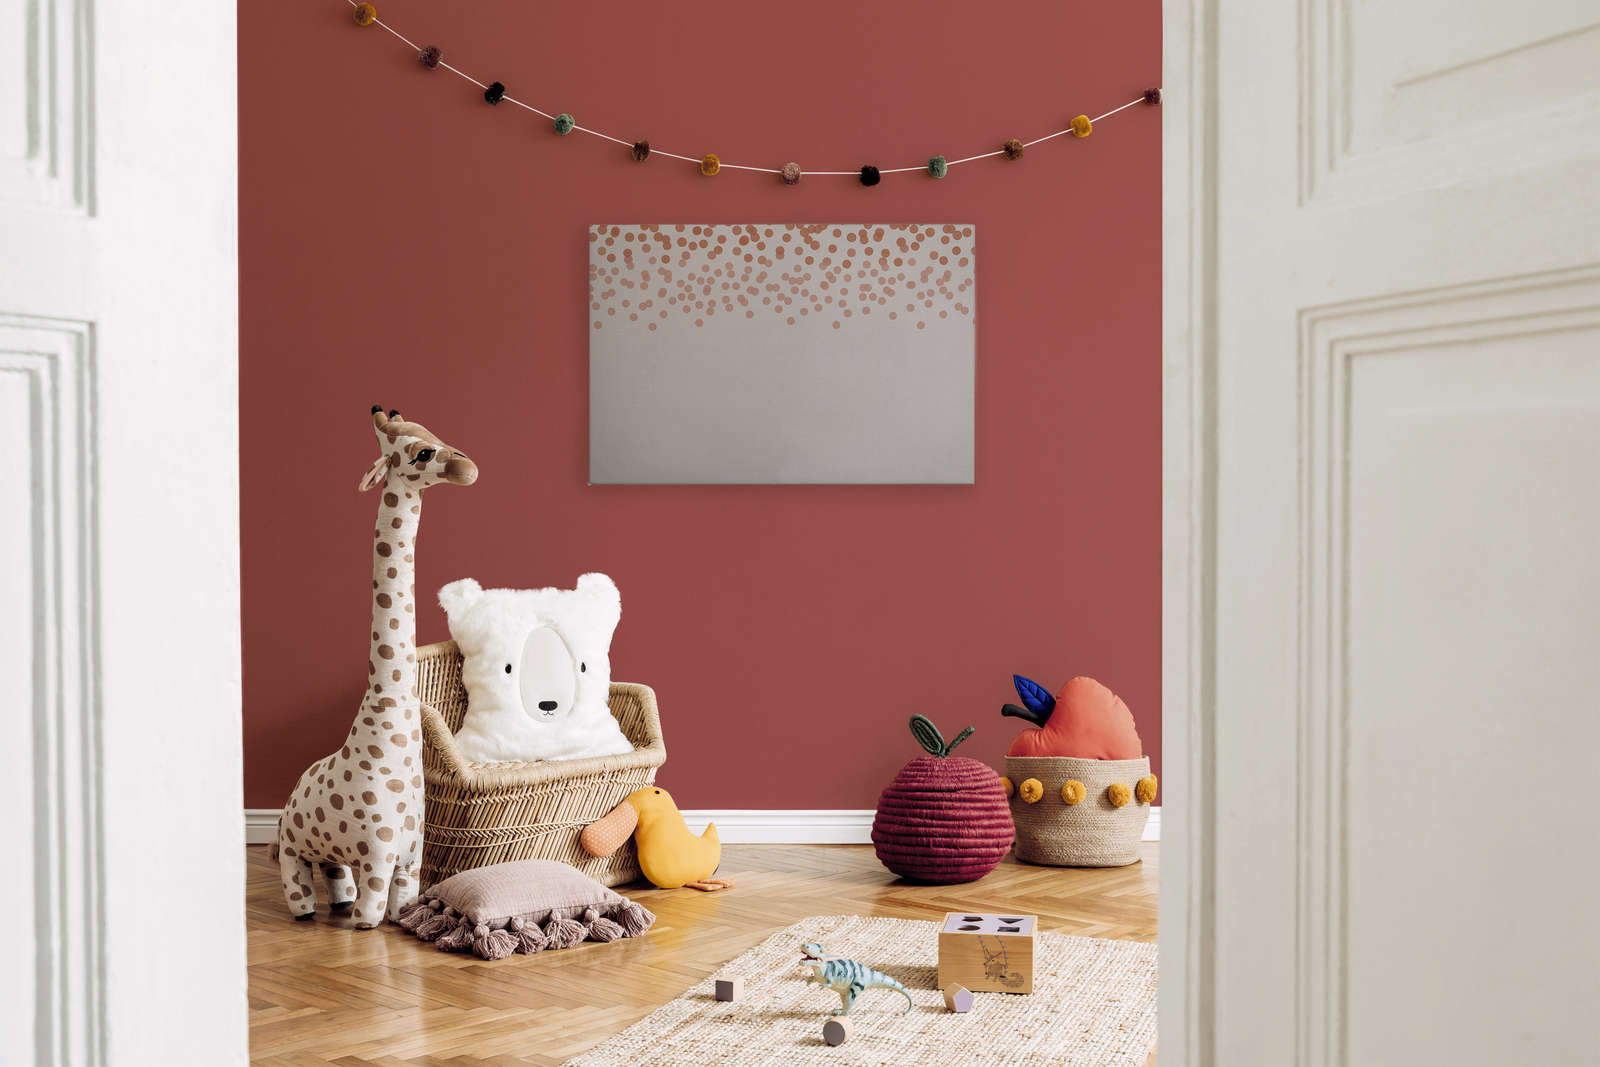             Canvas painting with discreet dot pattern | red, grey - 0.90 m x 0.60 m
        